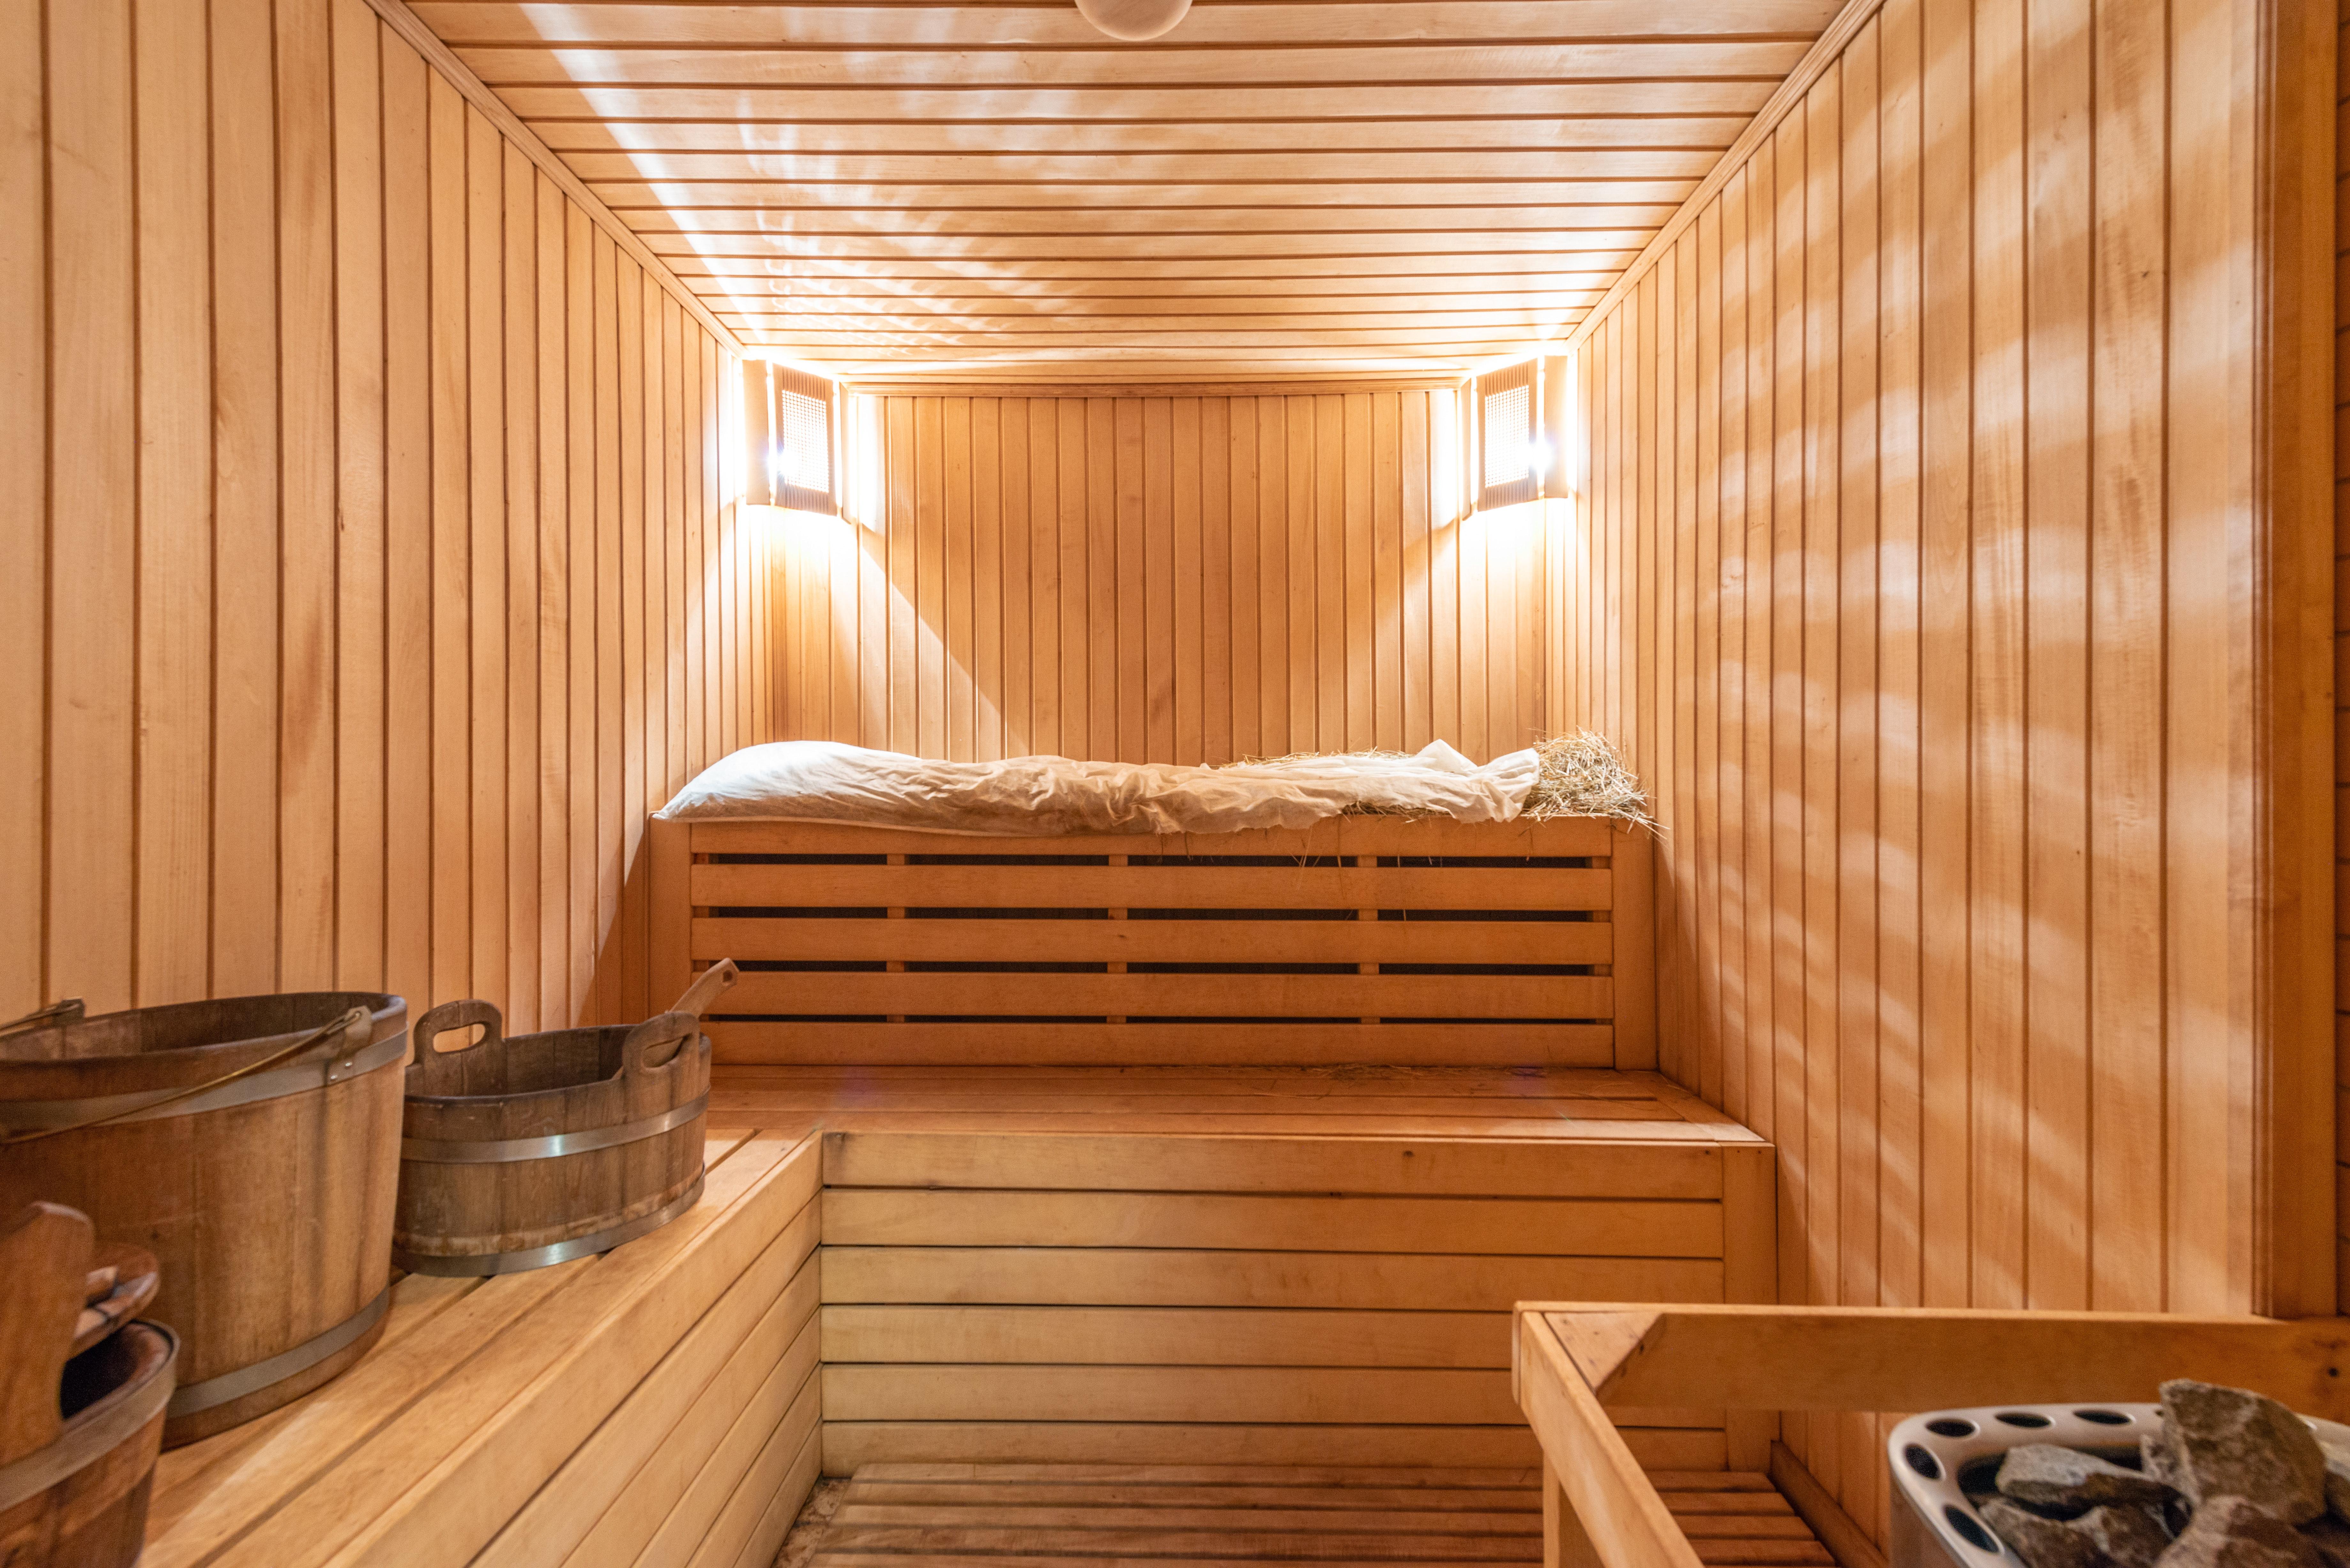 How often should I use sauna and steam room? 